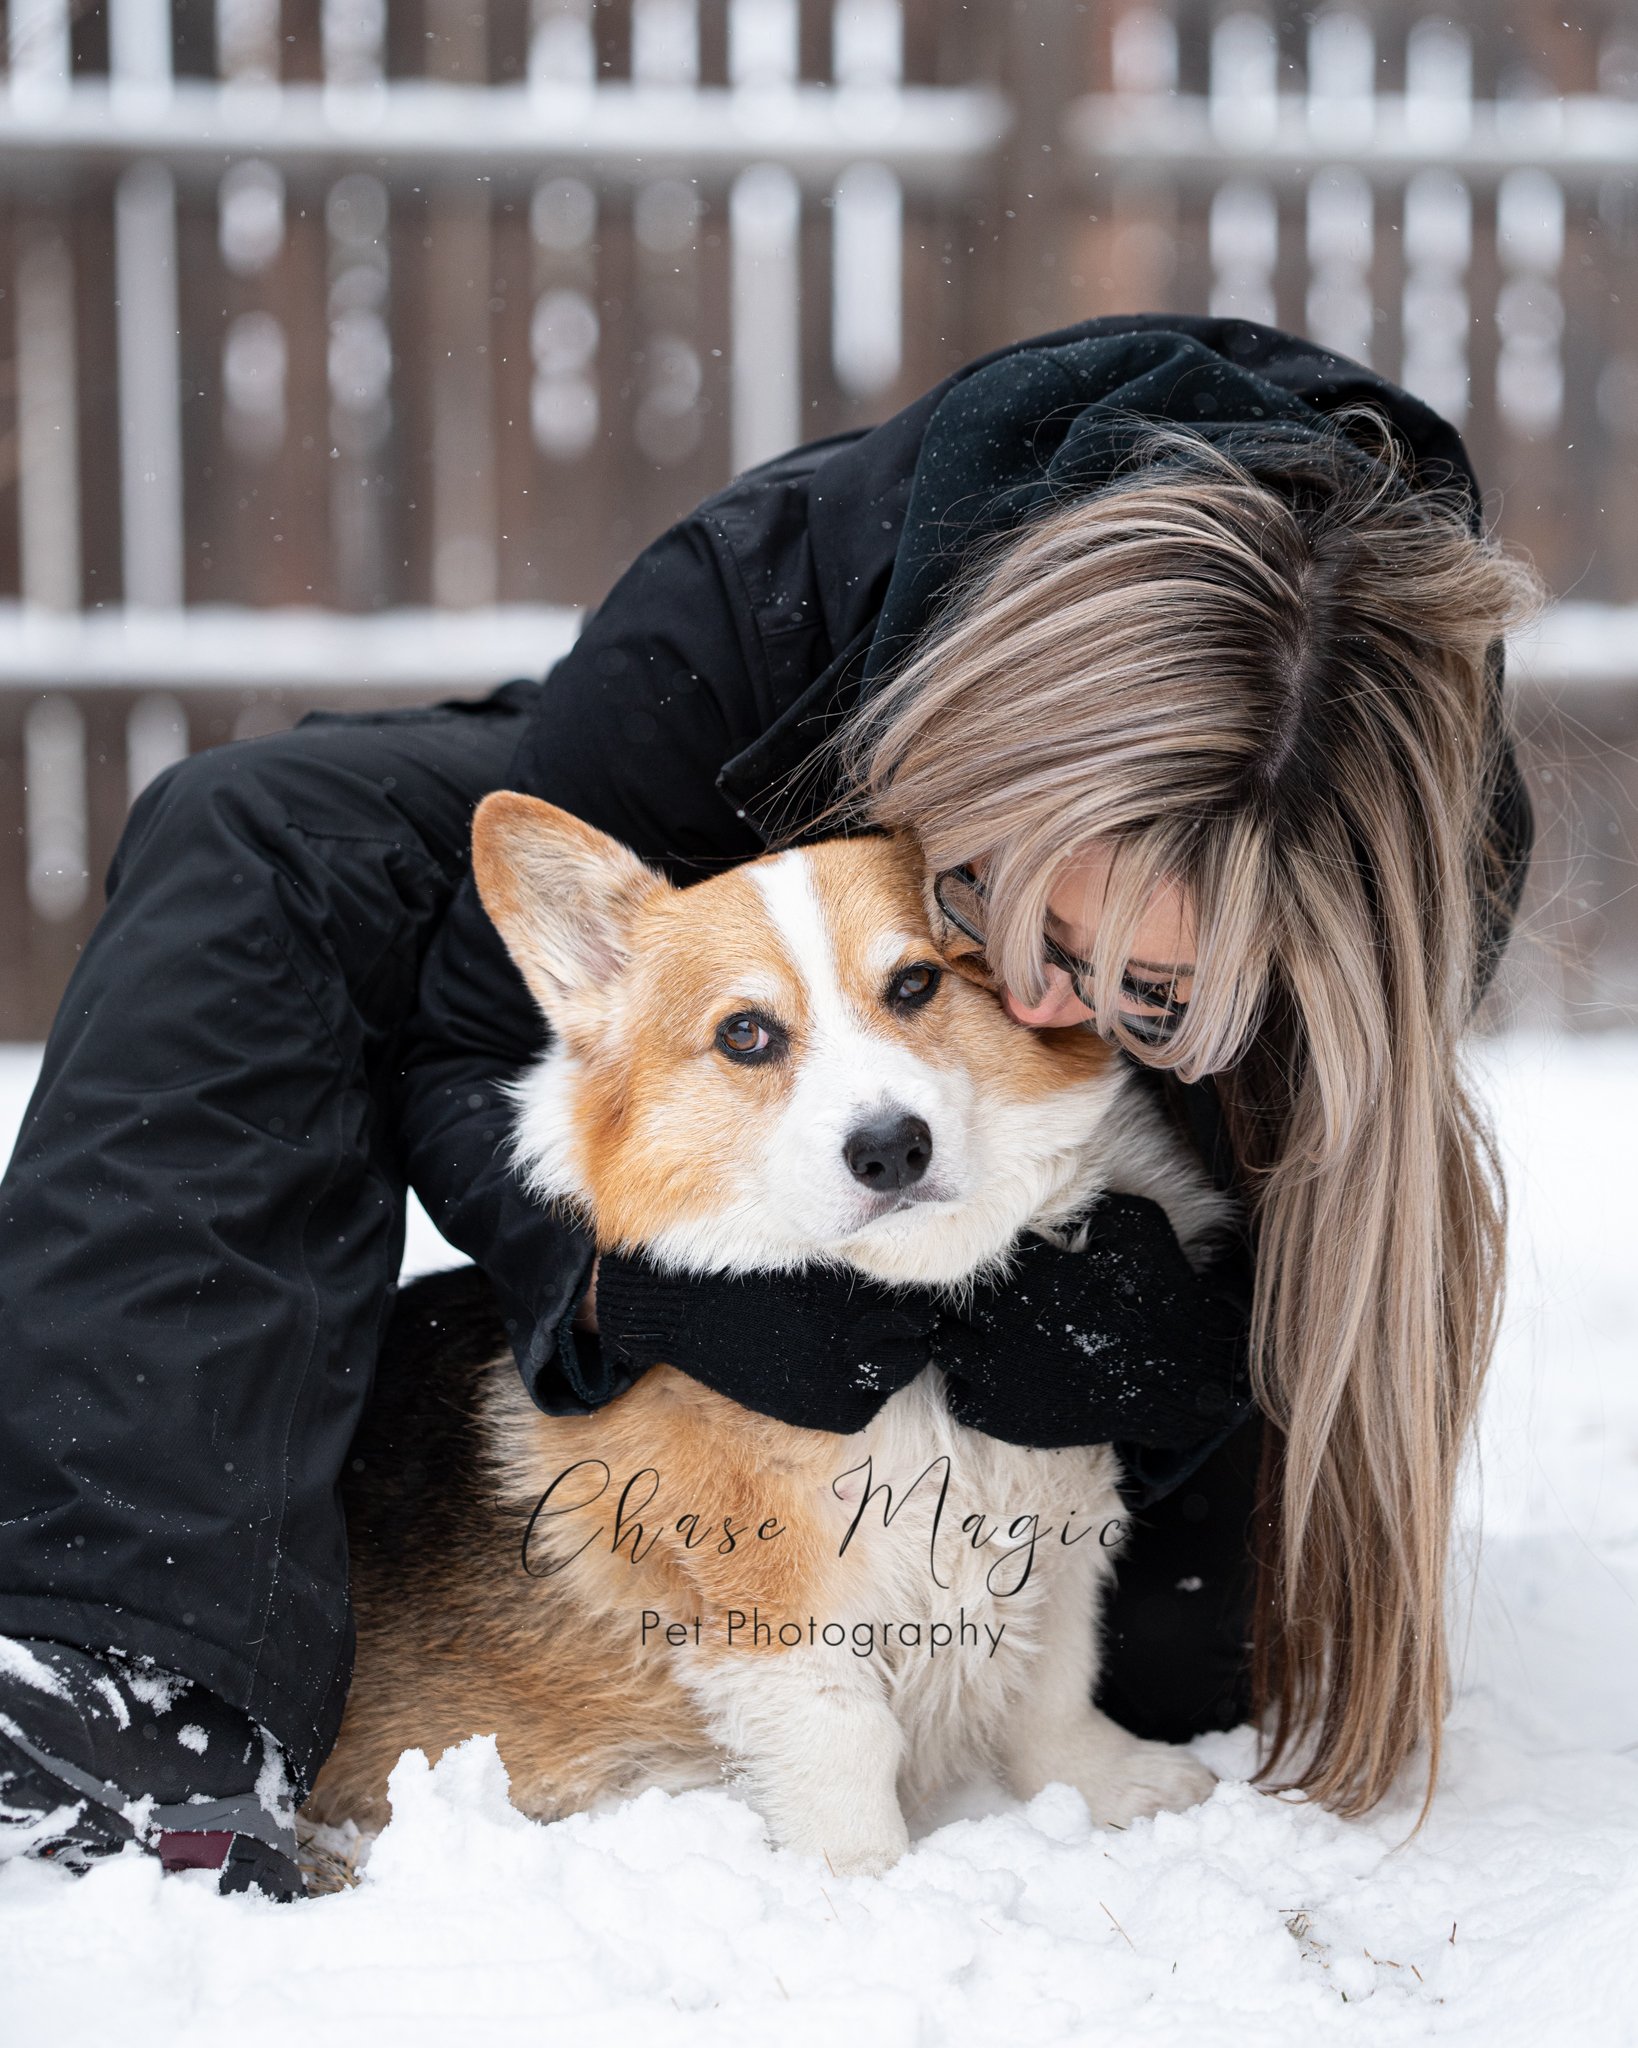 Crogi and a women enjoying the snow and getting kisses